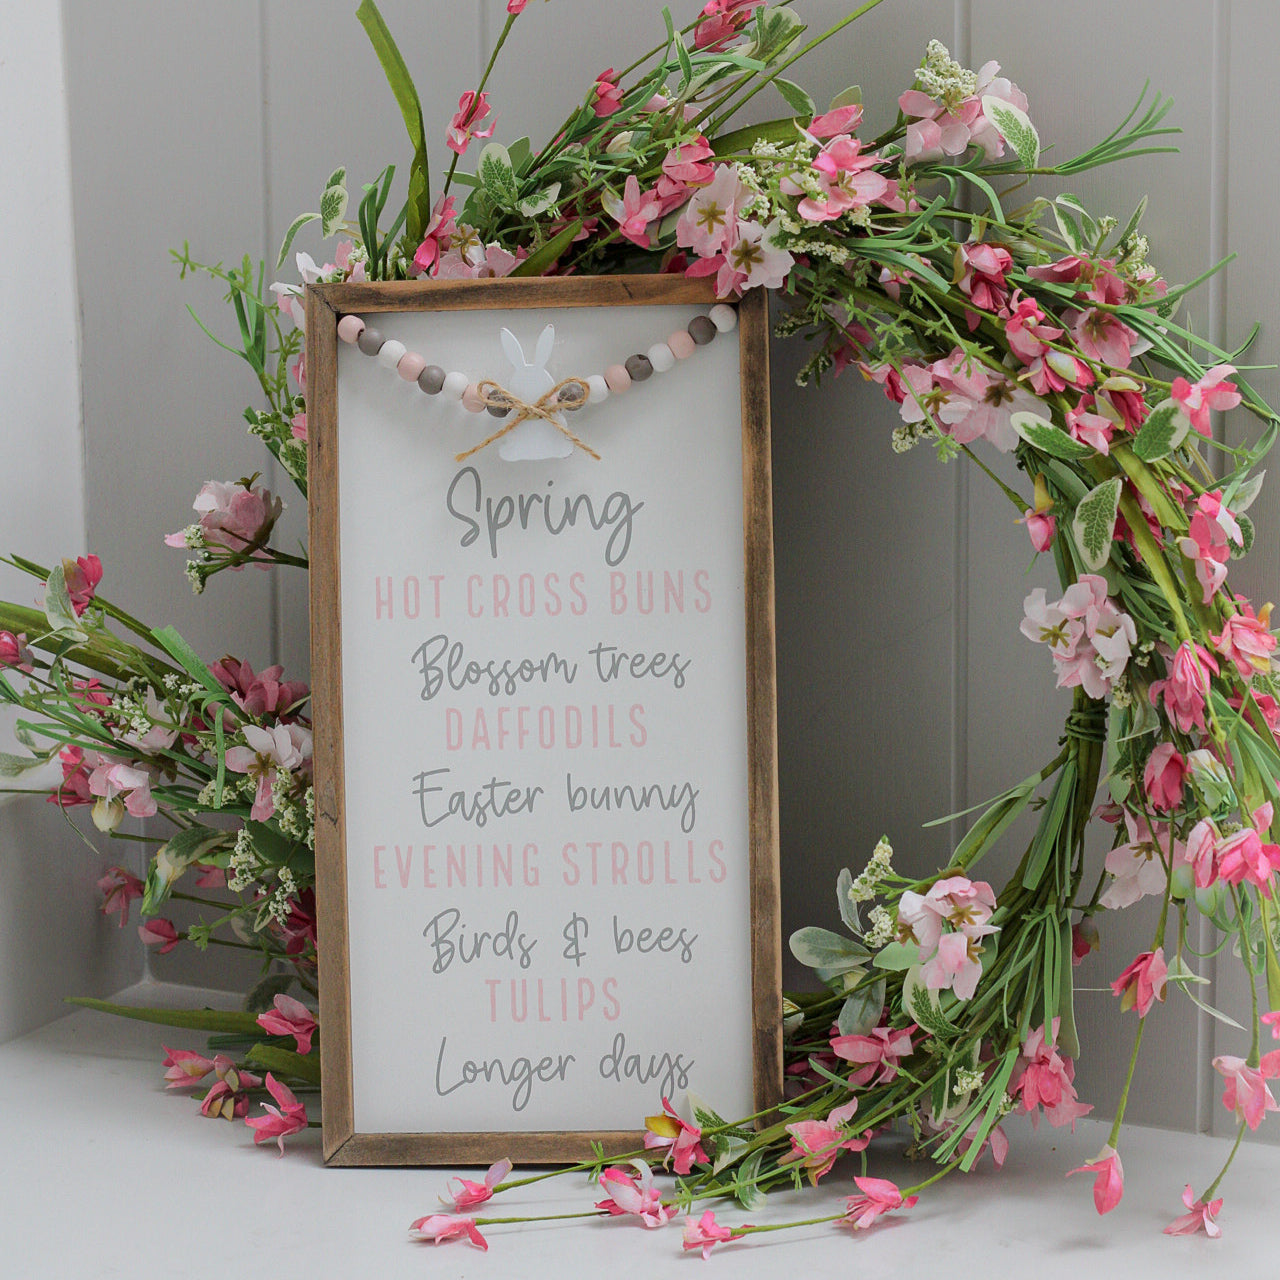 Rustic framed wooden plaque with white background with beaded hanging bunny detail and list of favourite things about Spring 'hot cross buns, Blossom trees, Daffodils, Easter bunny, Evening strolls, Birds and bees, tulips and longer days' with pink floral wreath behind